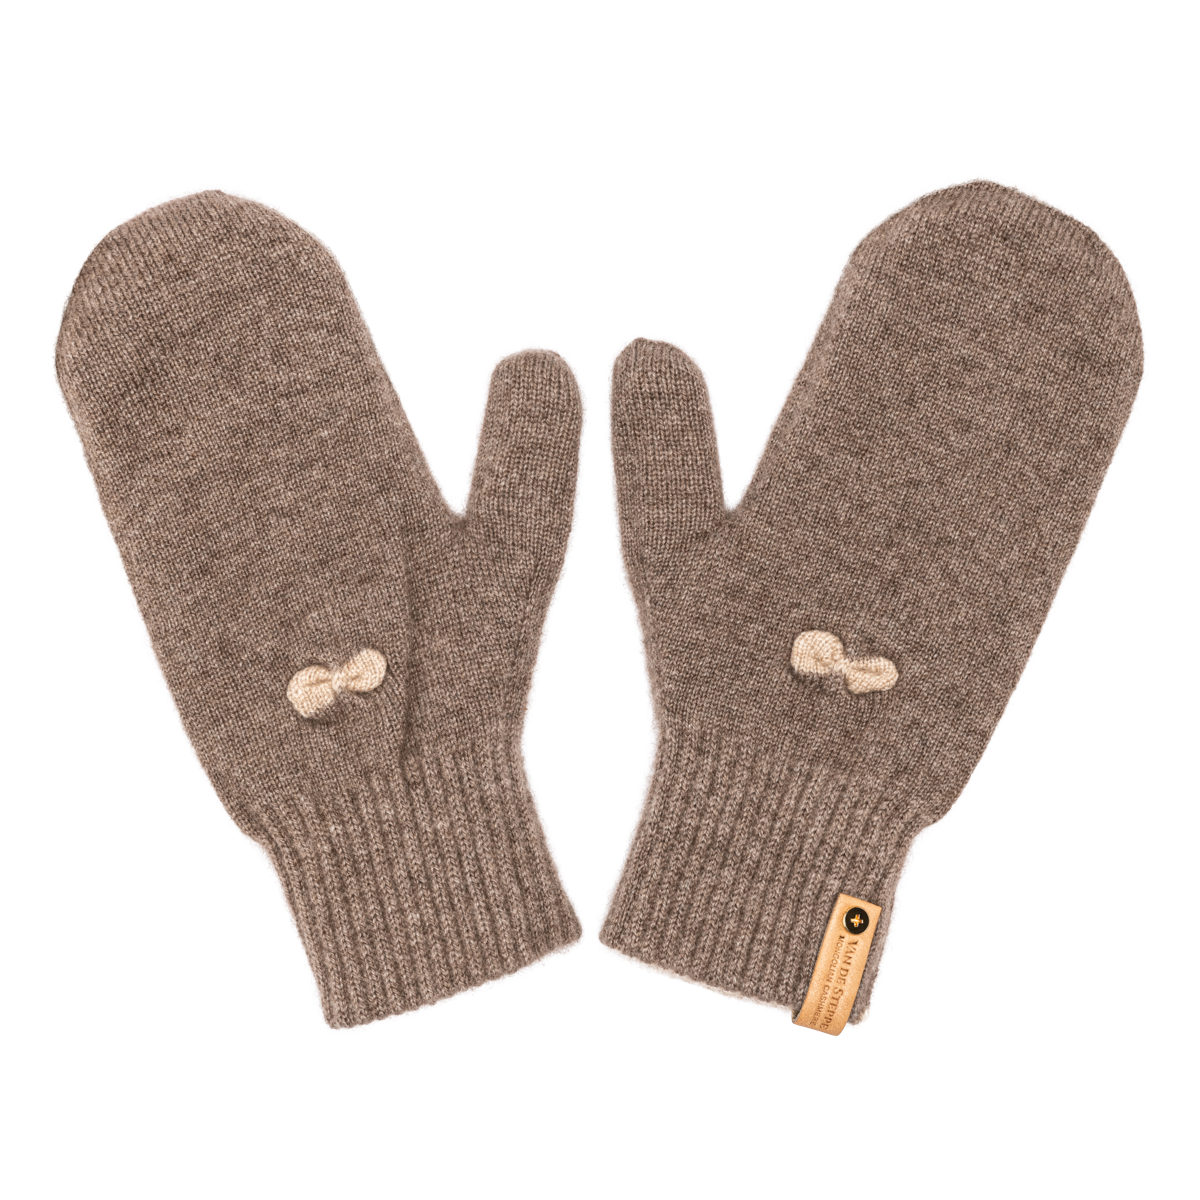 "Nomin" Cashmere Mittens